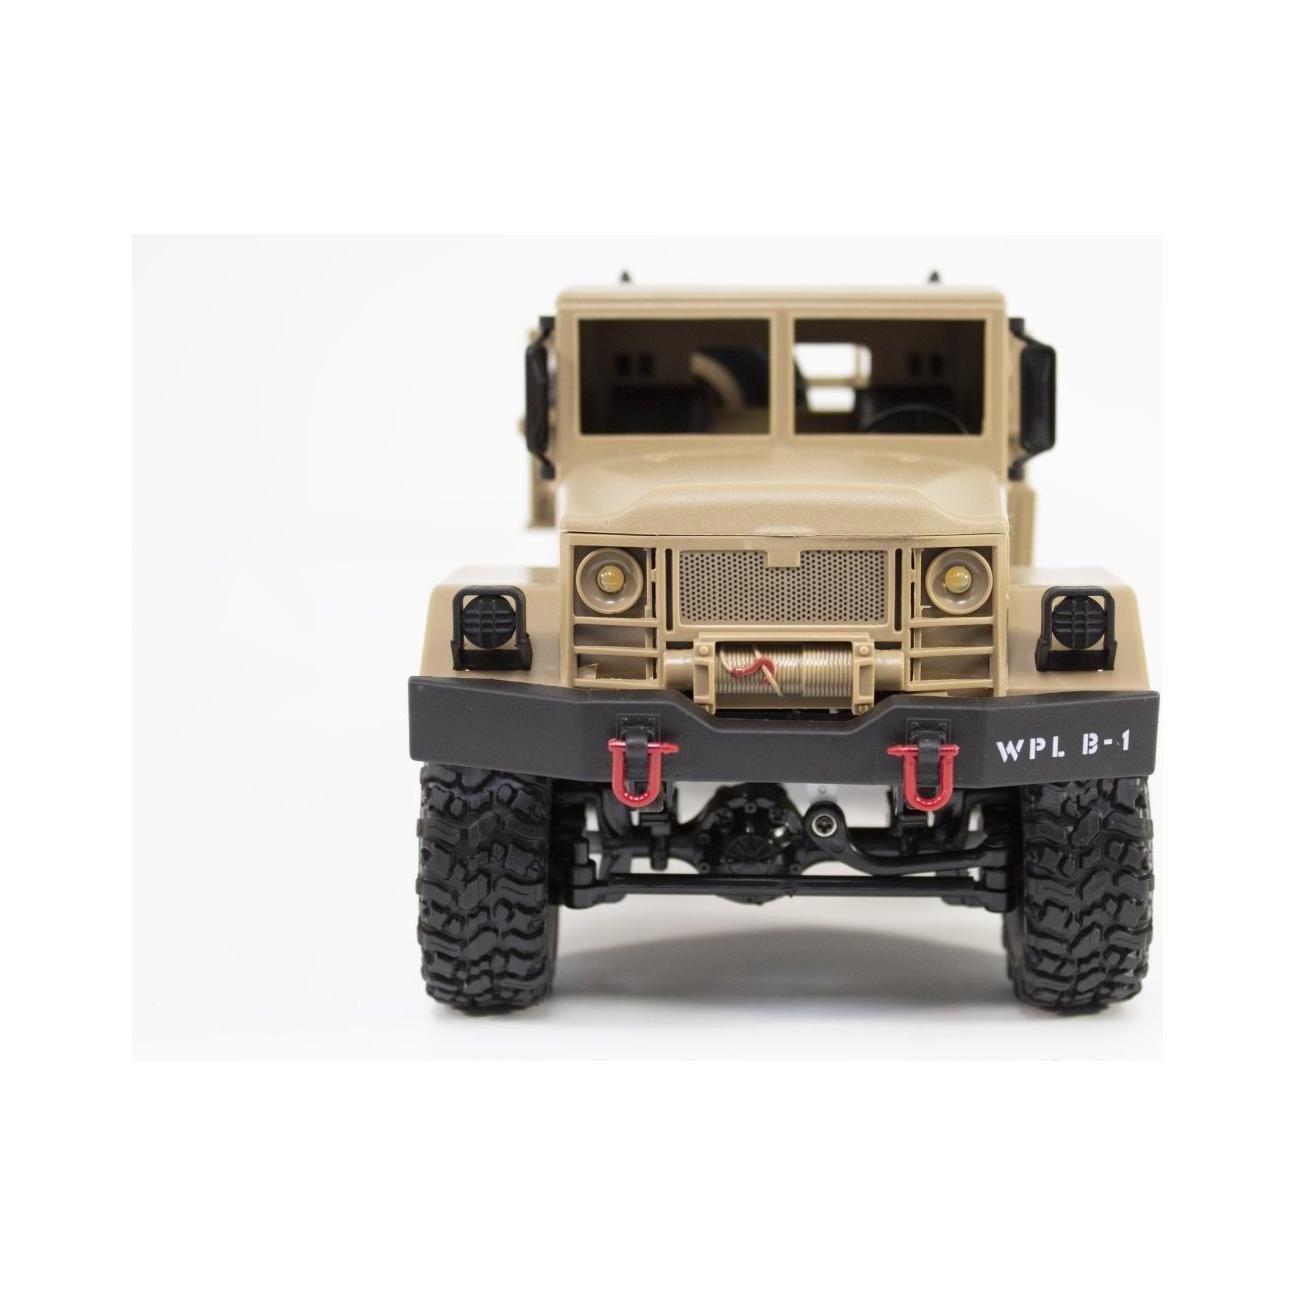 M35 6x6 1:16th Scale RTR 2.4GHz RC Truck